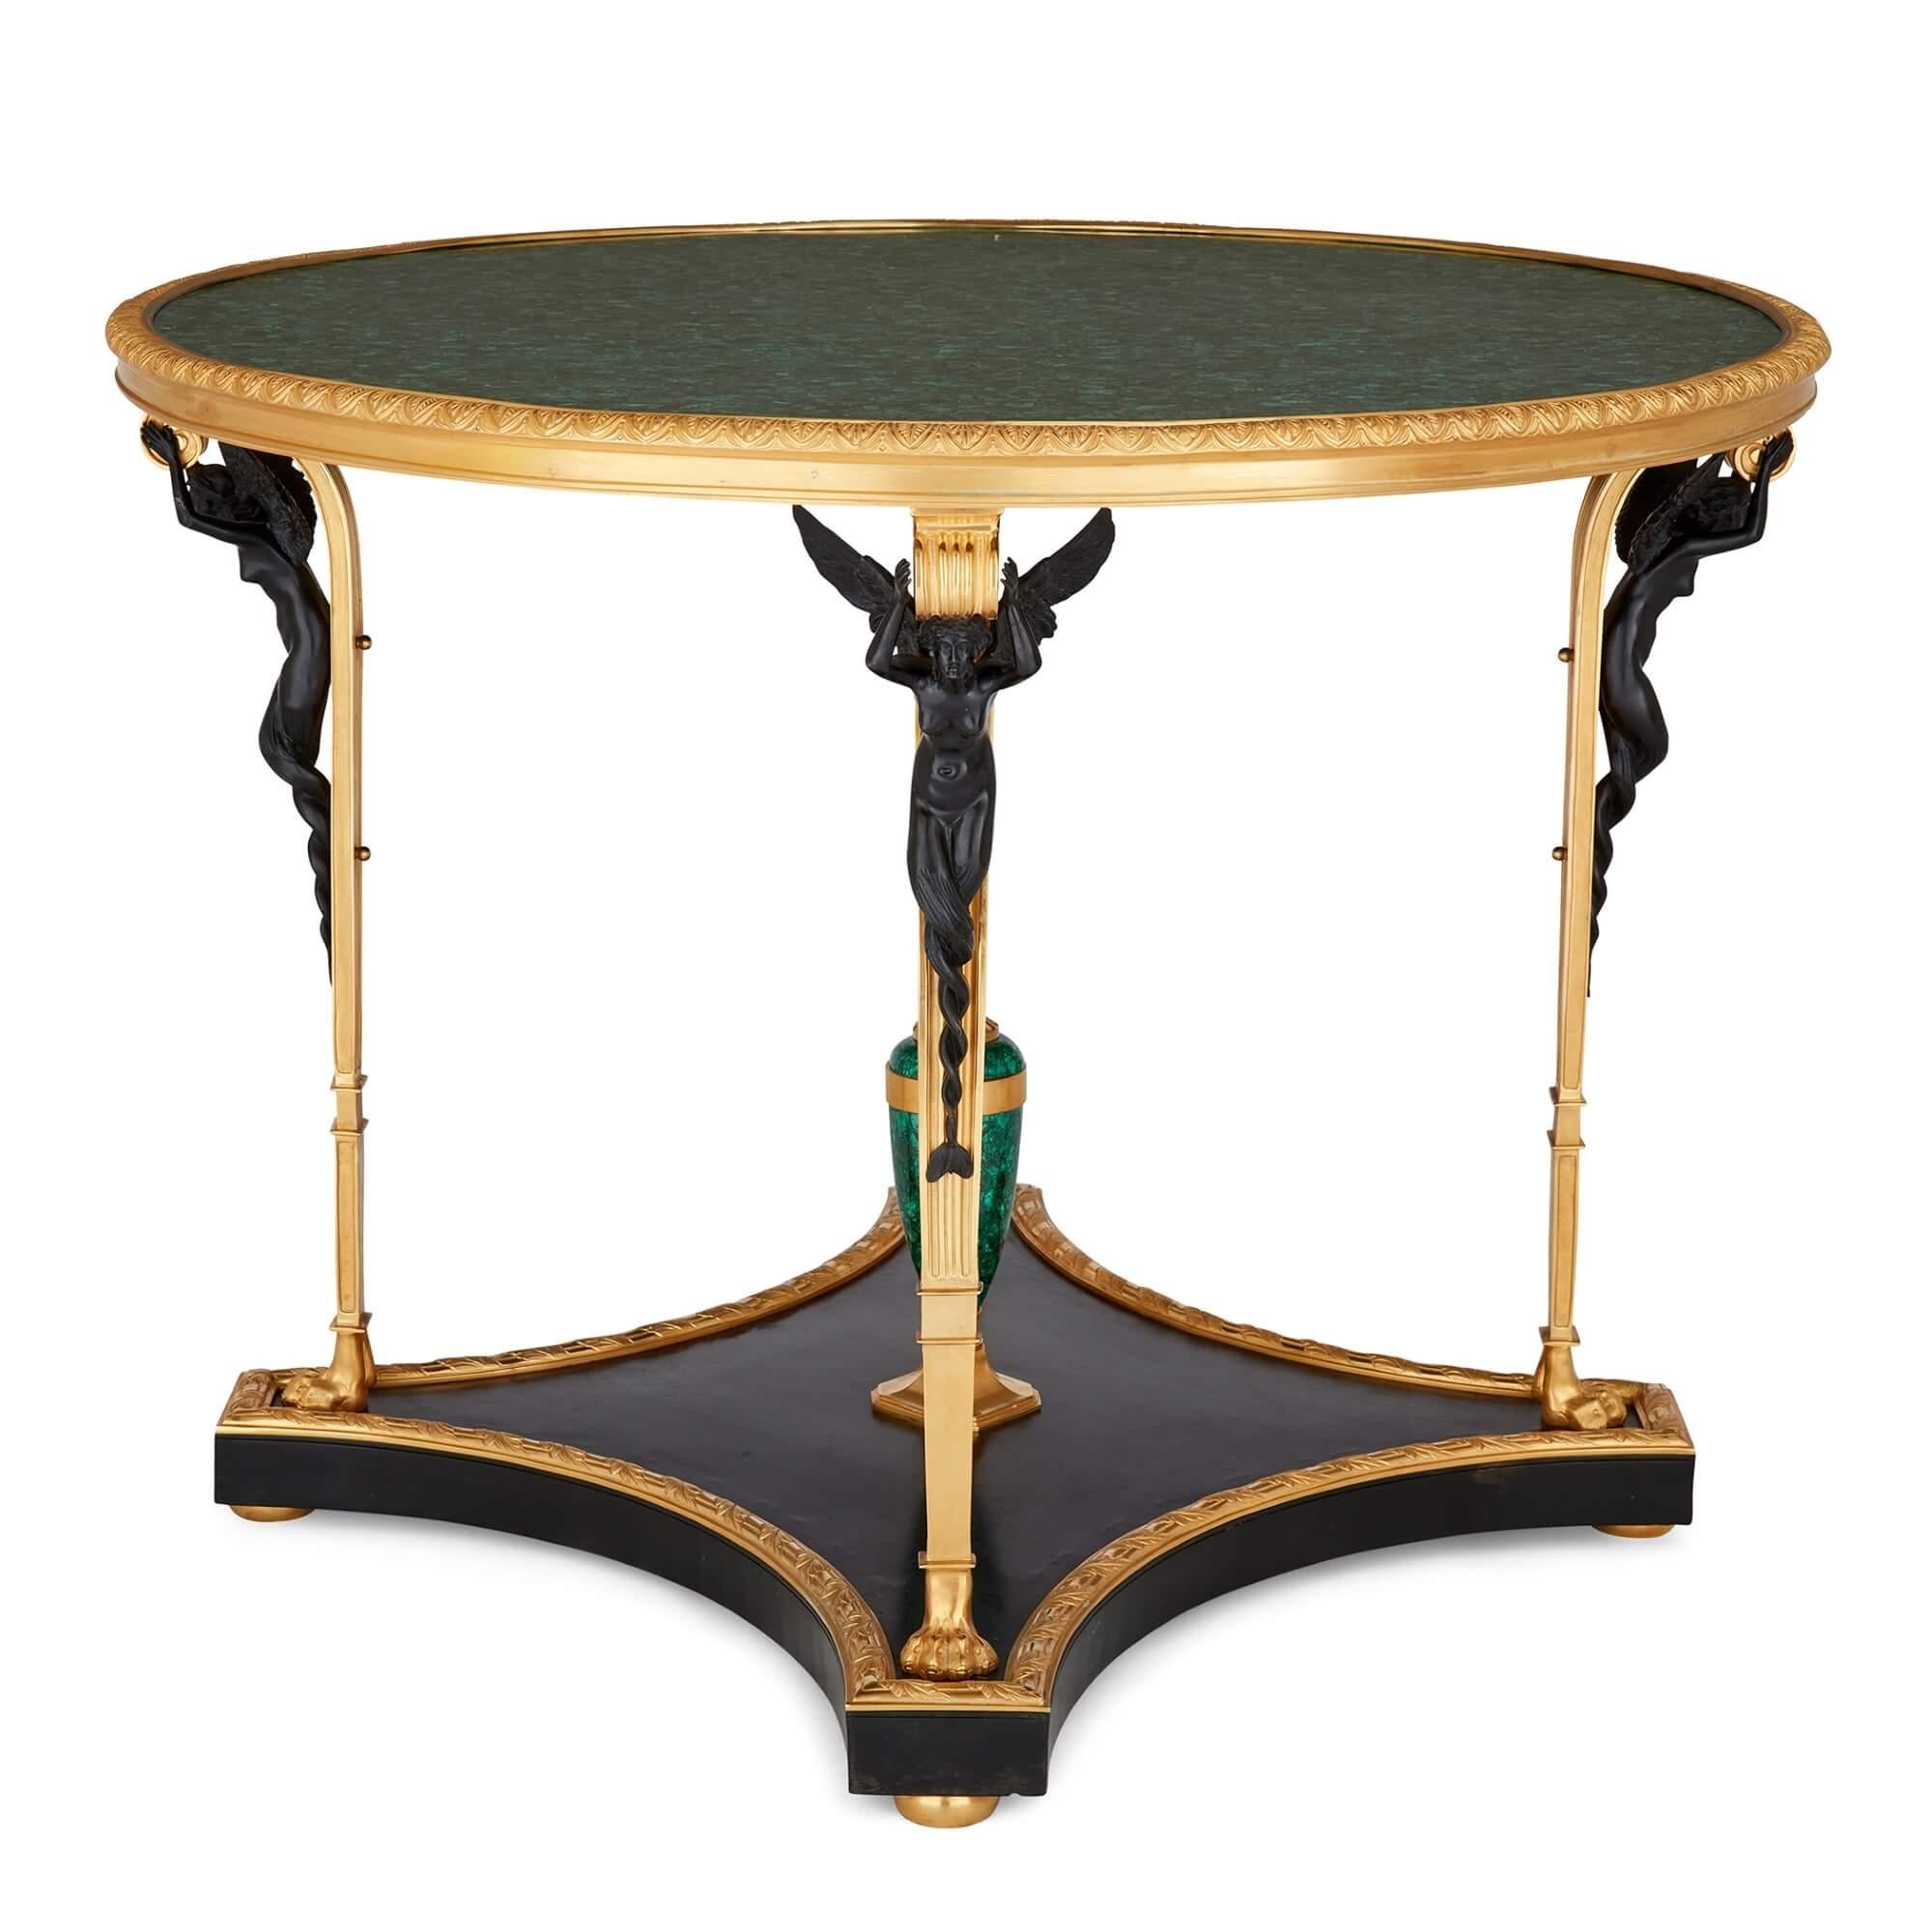 French Empire style ormolu mounted malachite centre table 
French, 20th Century
Height 77cm, diameter 100cm

Wonderfully crafted from a selection of high quality materials, this French Empire style centre table would make a stunning addition to an